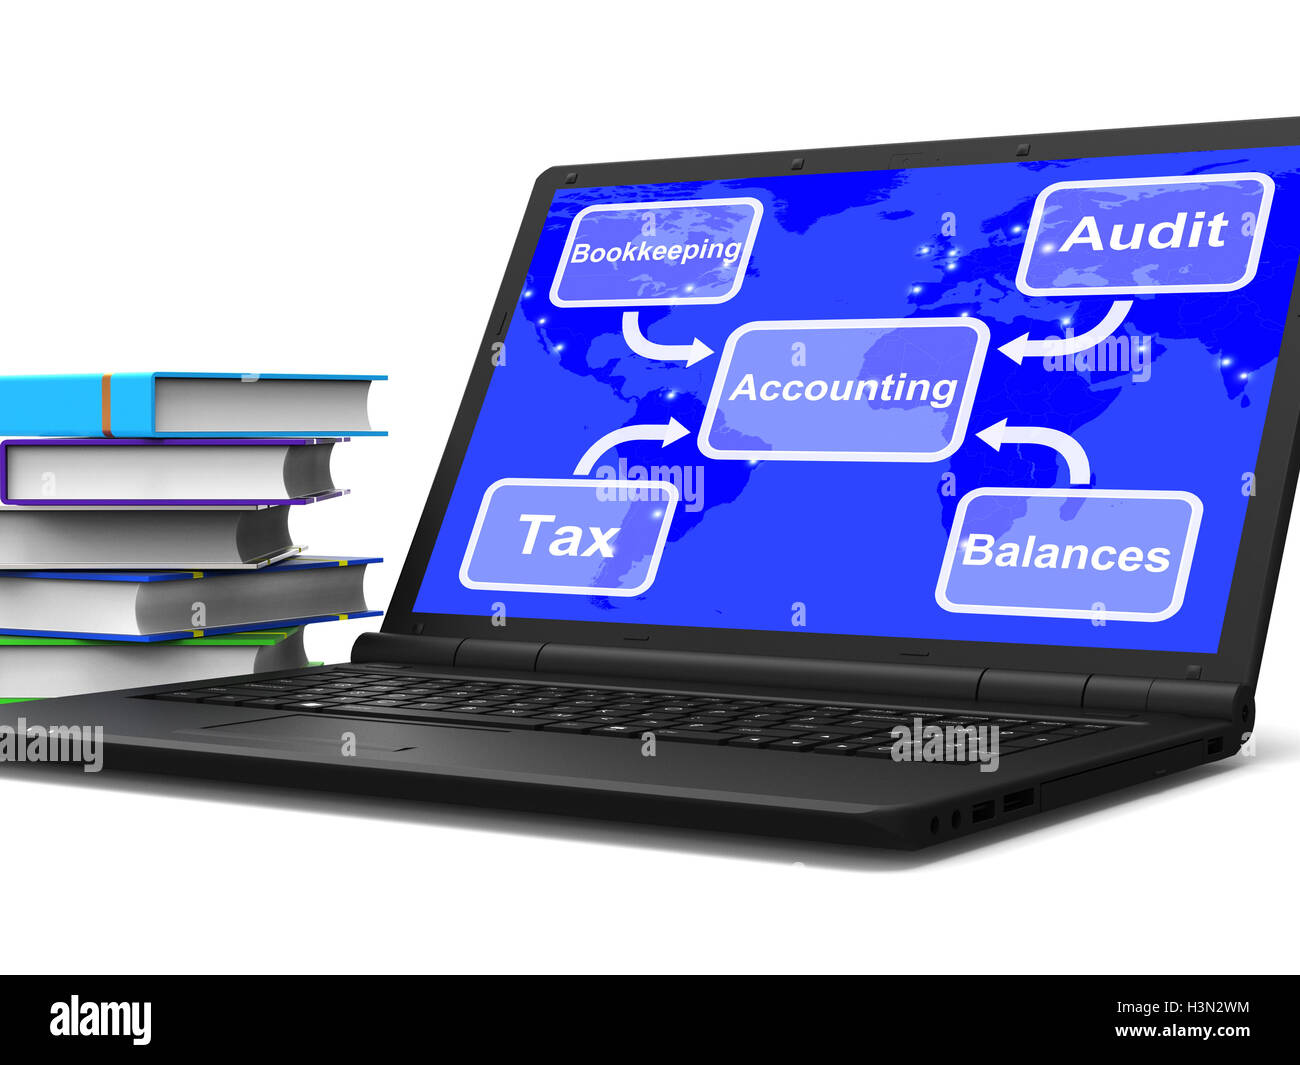 Accounting Map Laptop Shows Bookkeeping Taxes And Balances Stock Photo